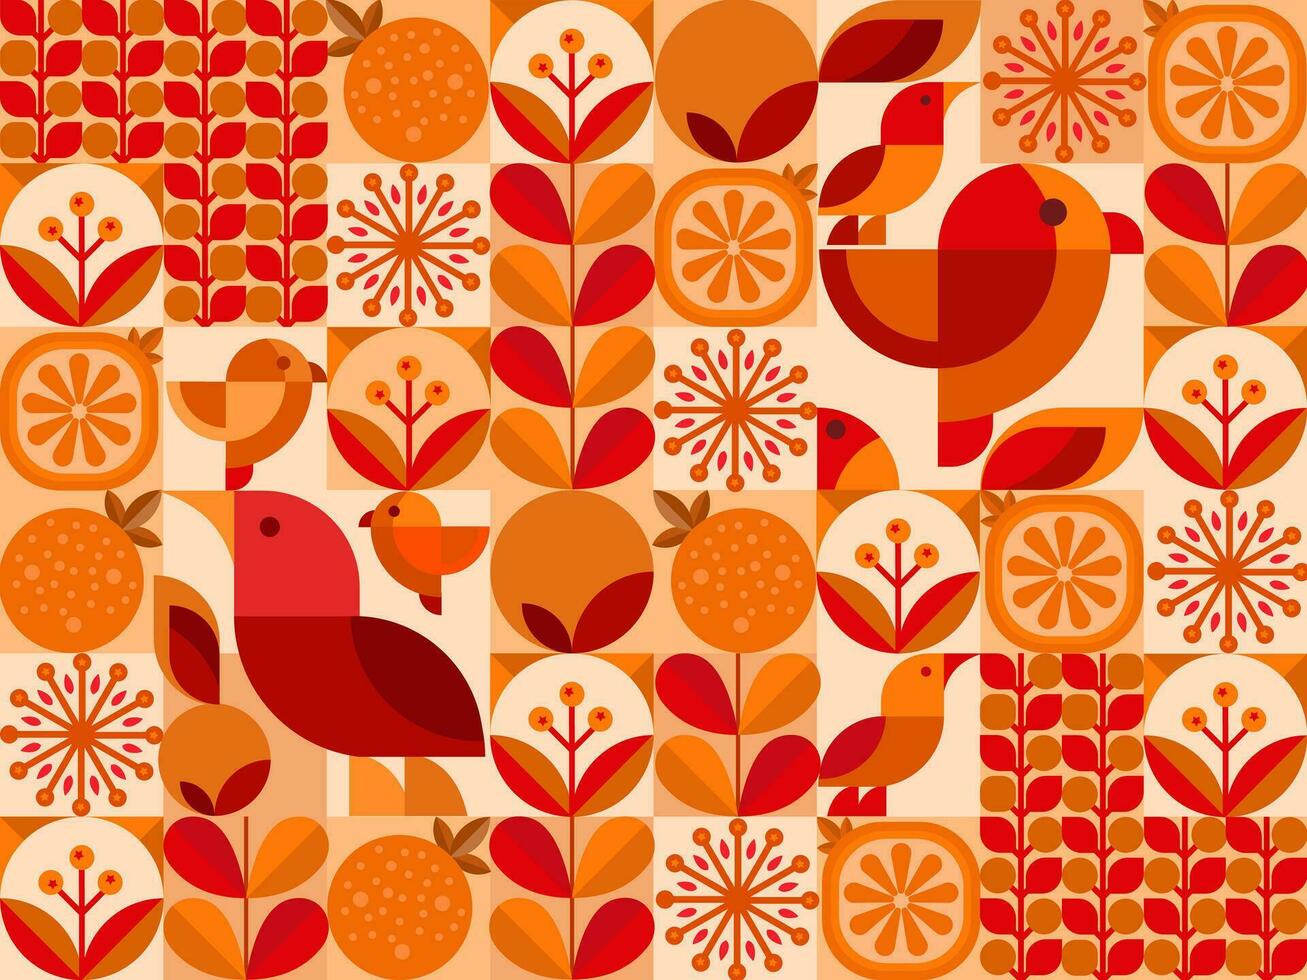 geometric shapes with beautiful birds and leaves for the background vector